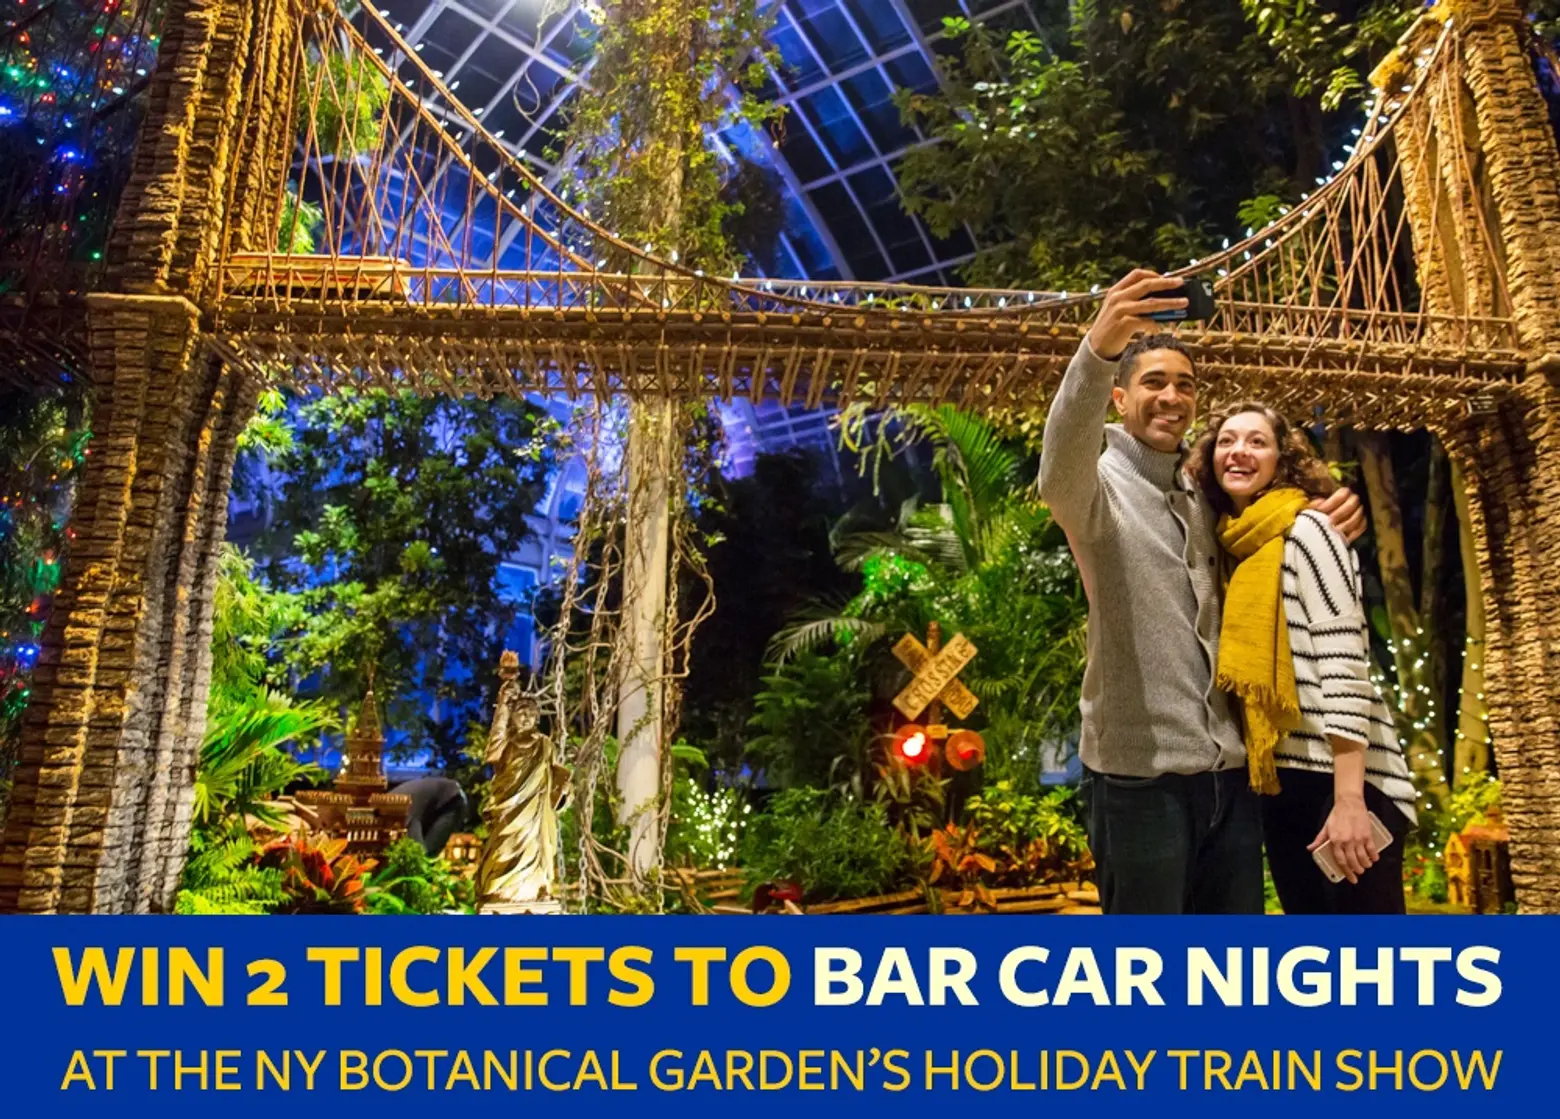 Win a pair of tickets to the New York Botanical Garden’s Bar Car Nights